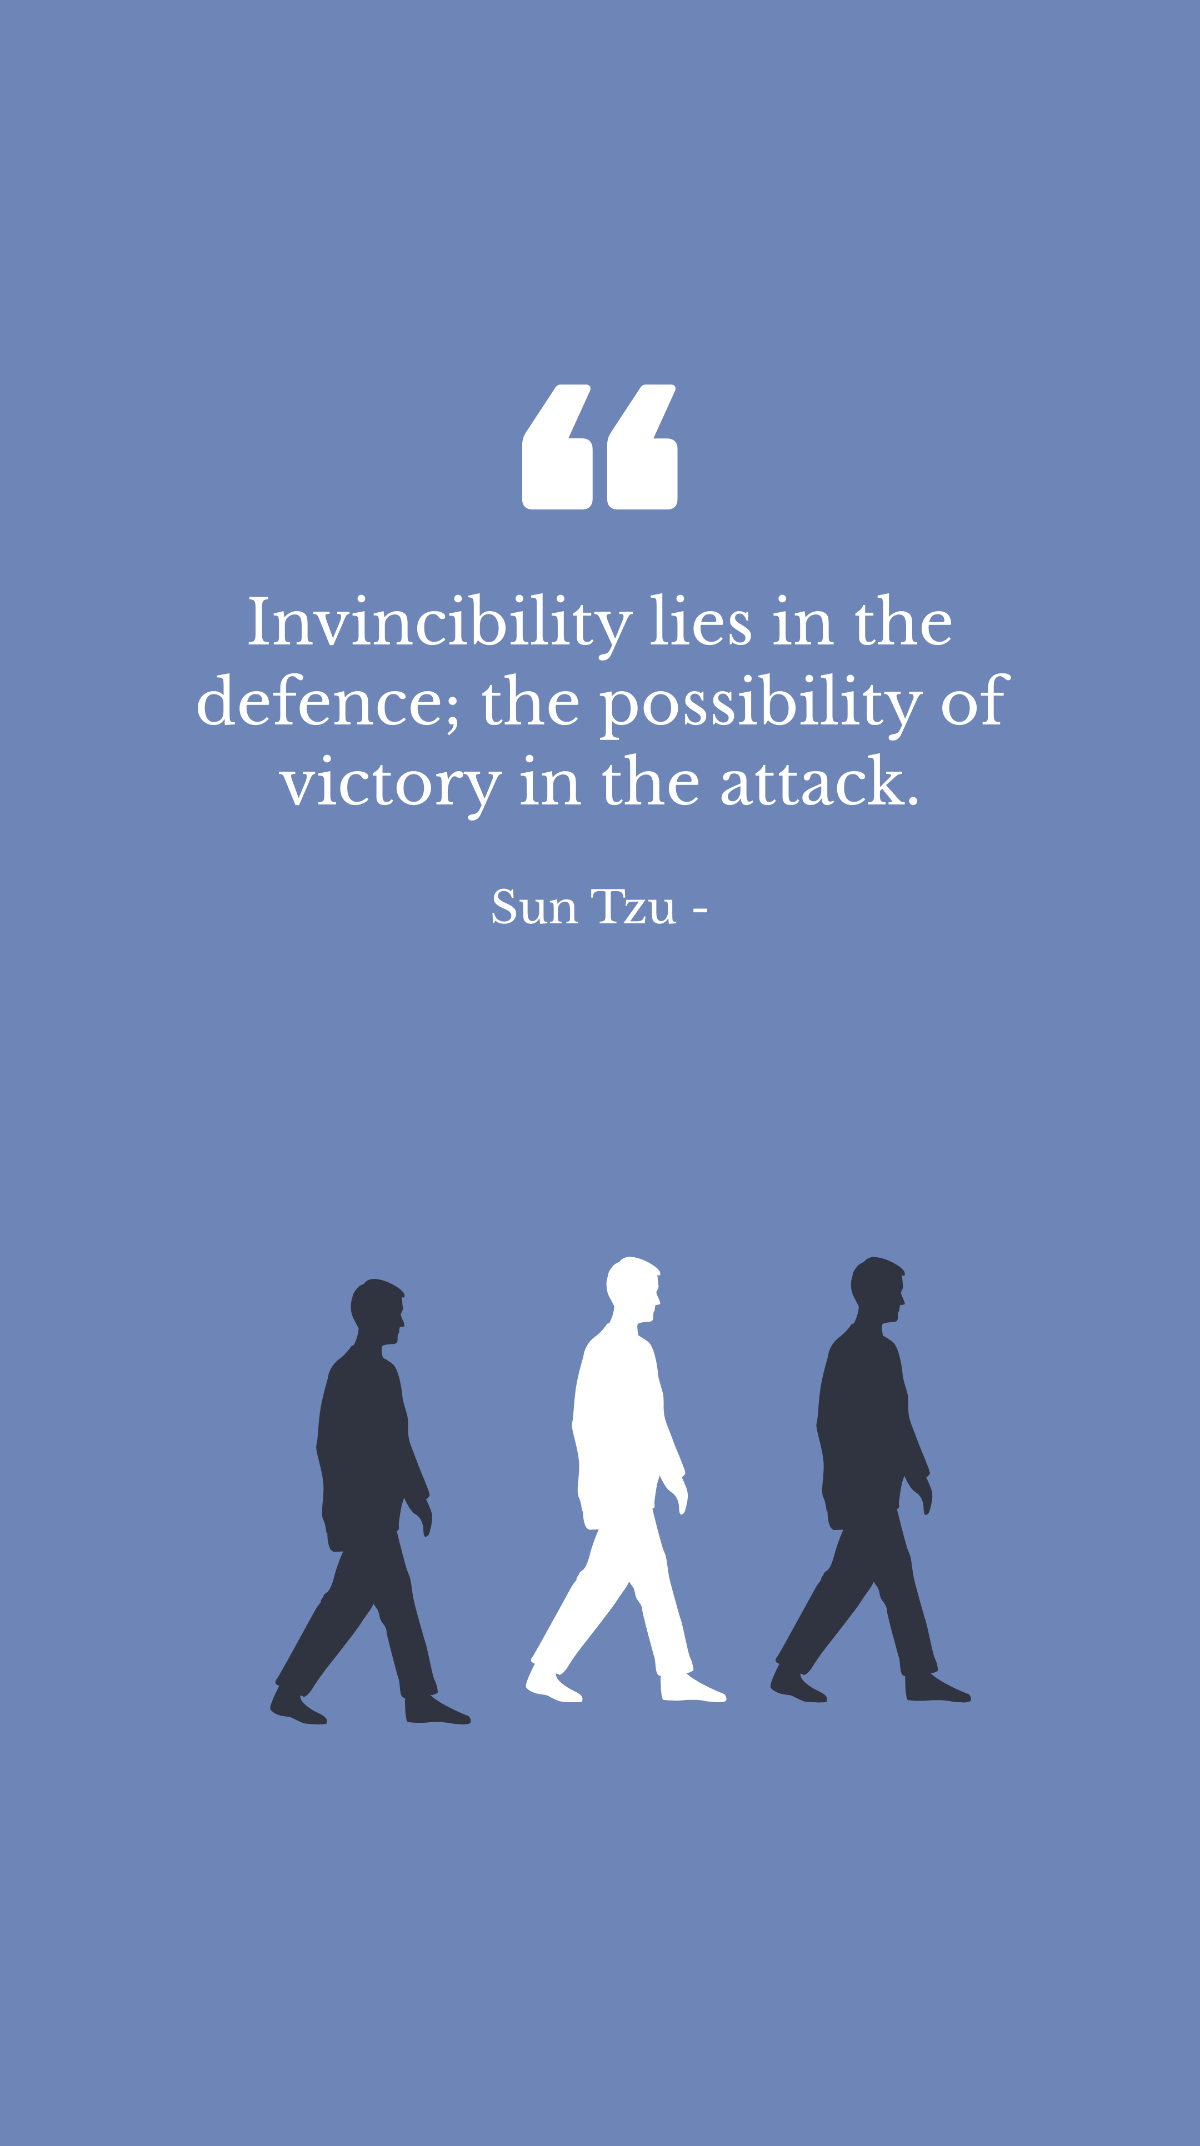 Sun Tzu - Invincibility lies in the defence; the possibility of victory in the attack. Template